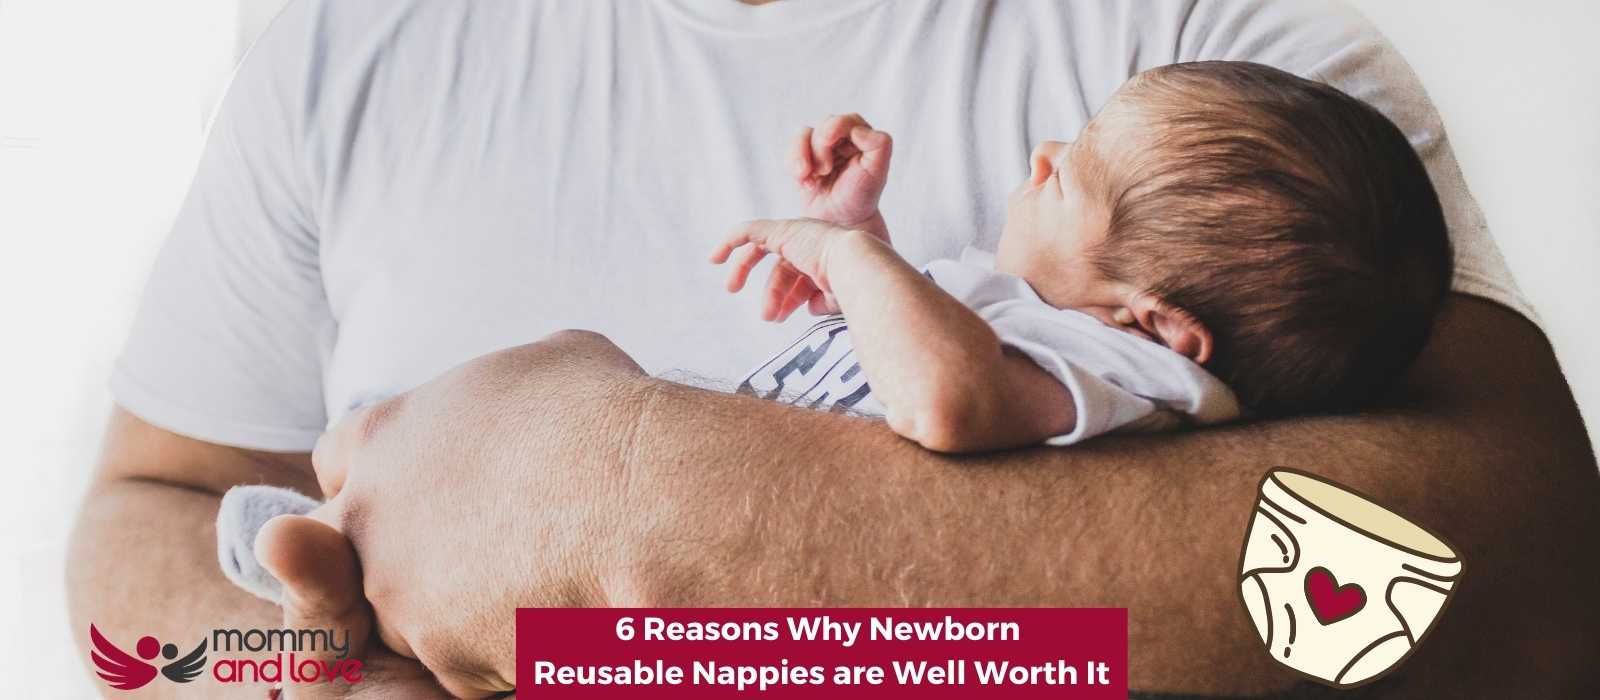 6 Reasons Why Newborn Reusable Nappies are Well Worth It